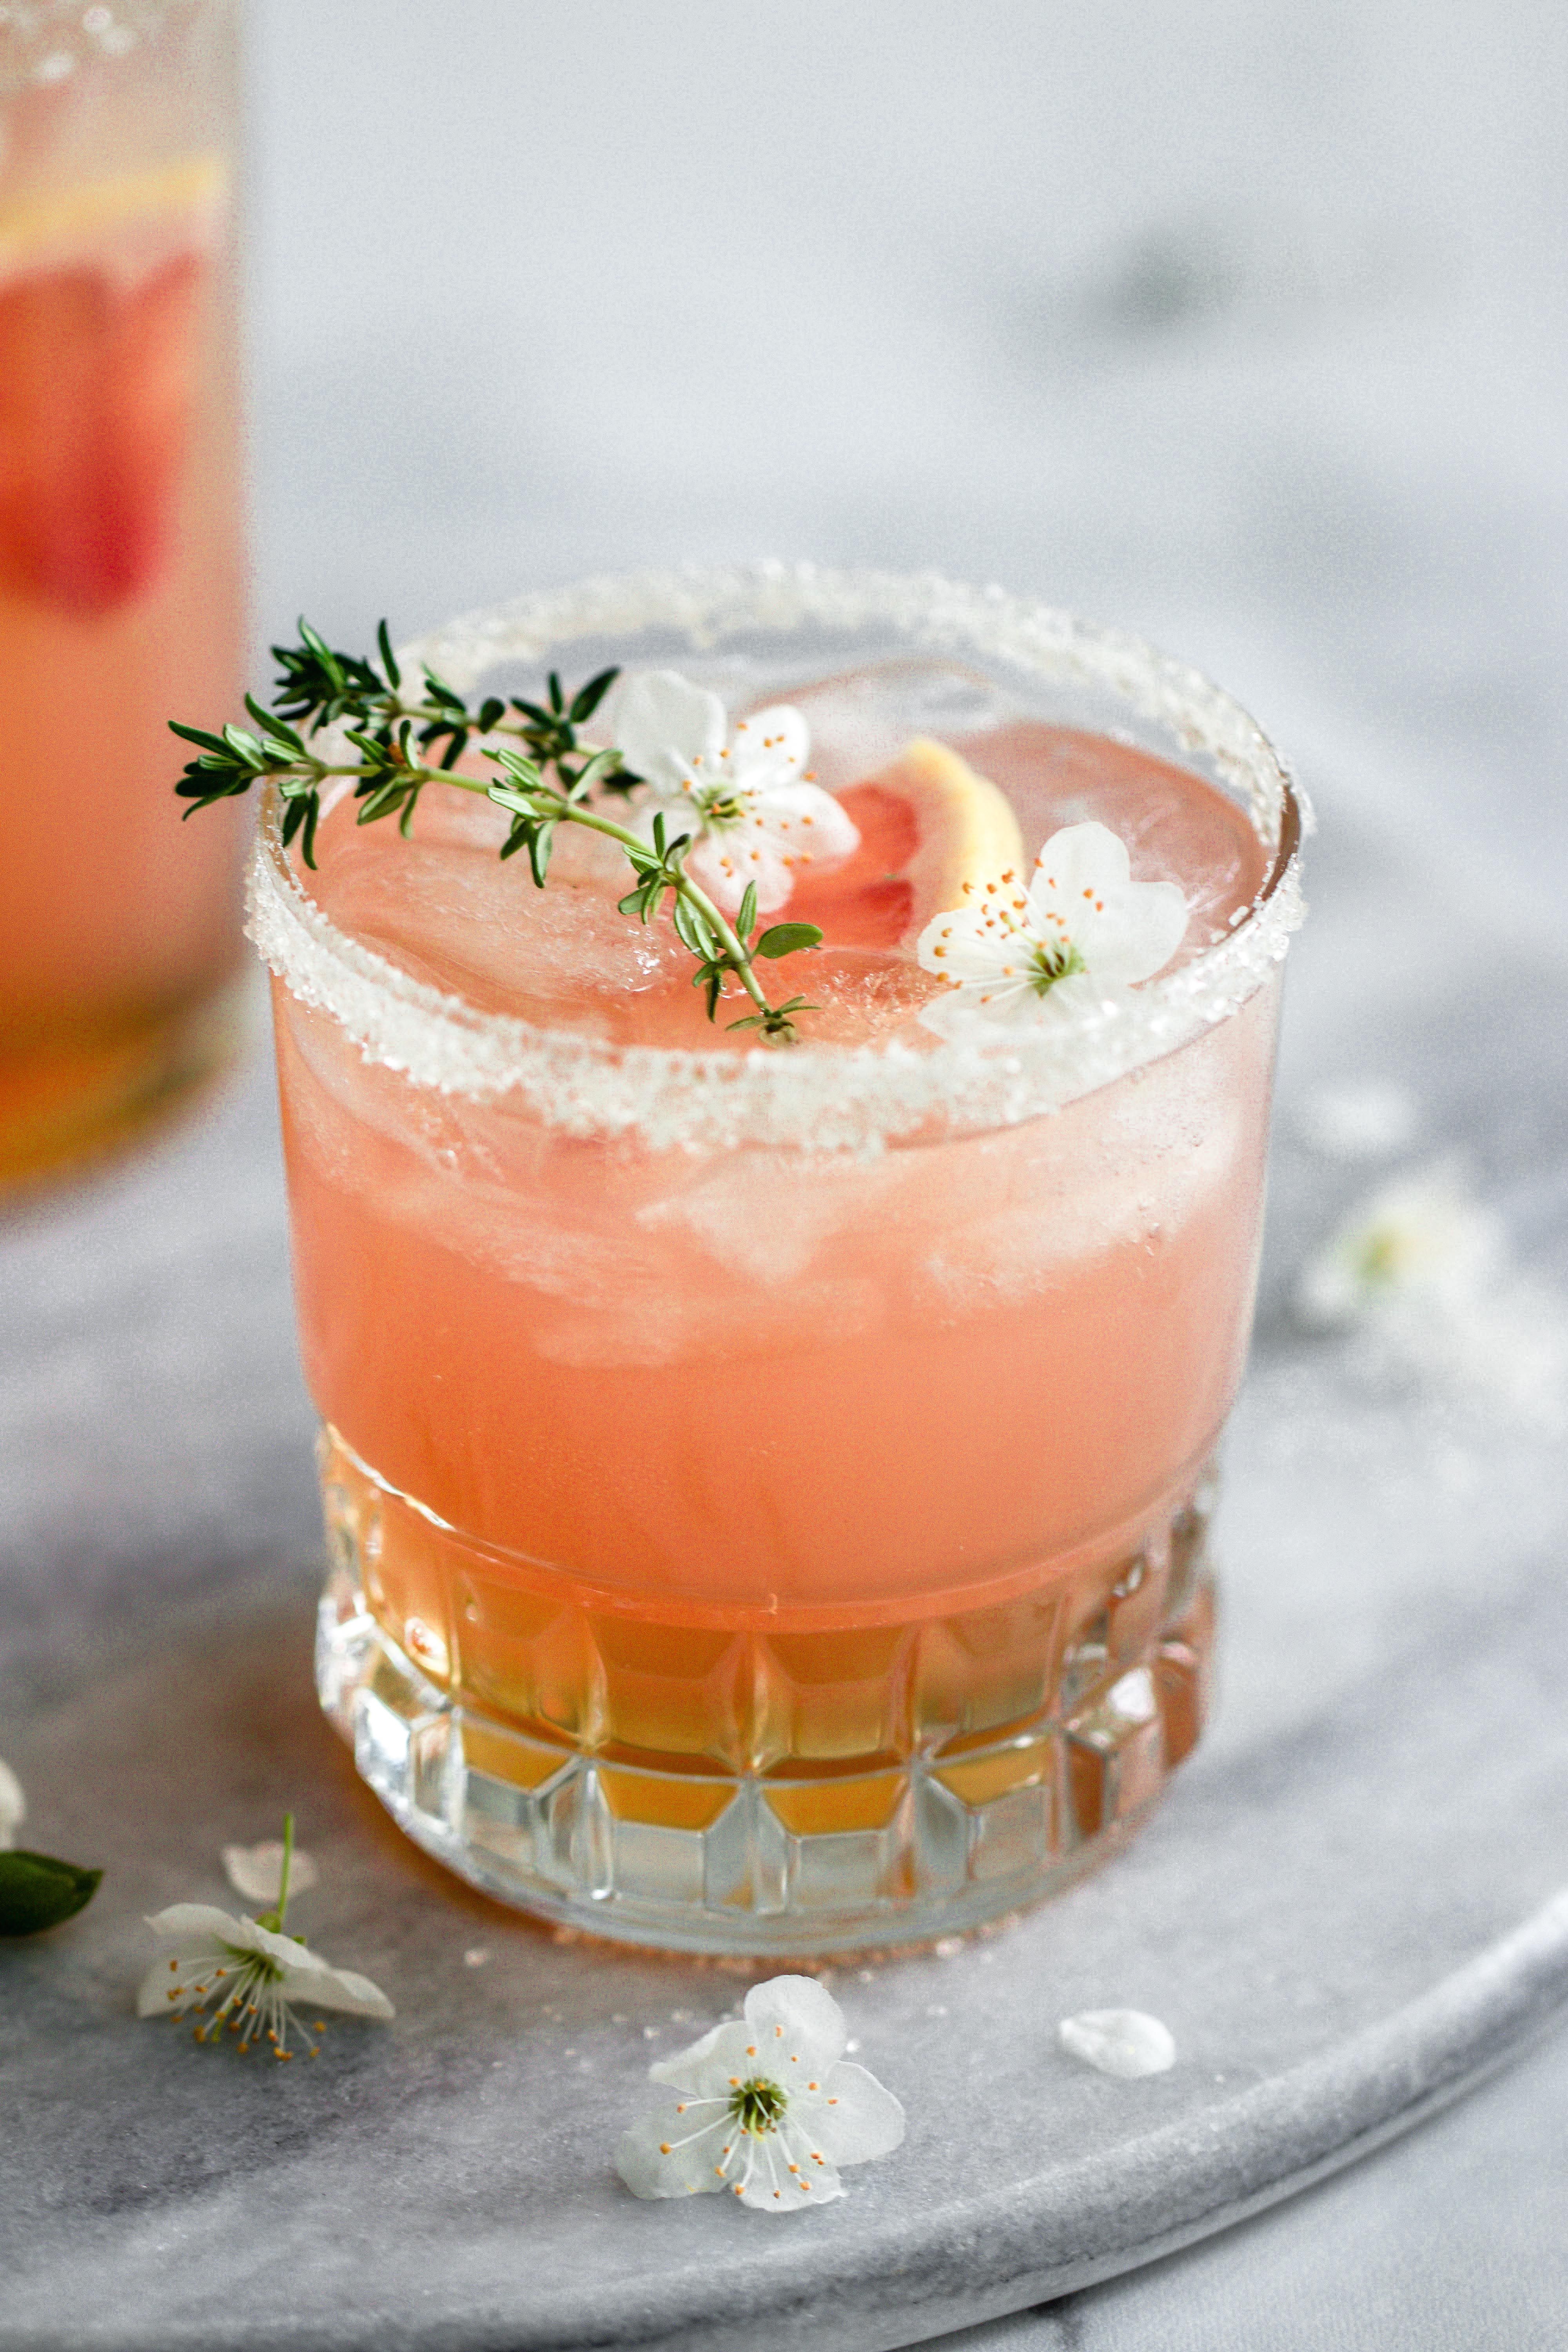 Grapefruit Thyme Mocktail by flowersinthesalad | Quick & Easy Recipe